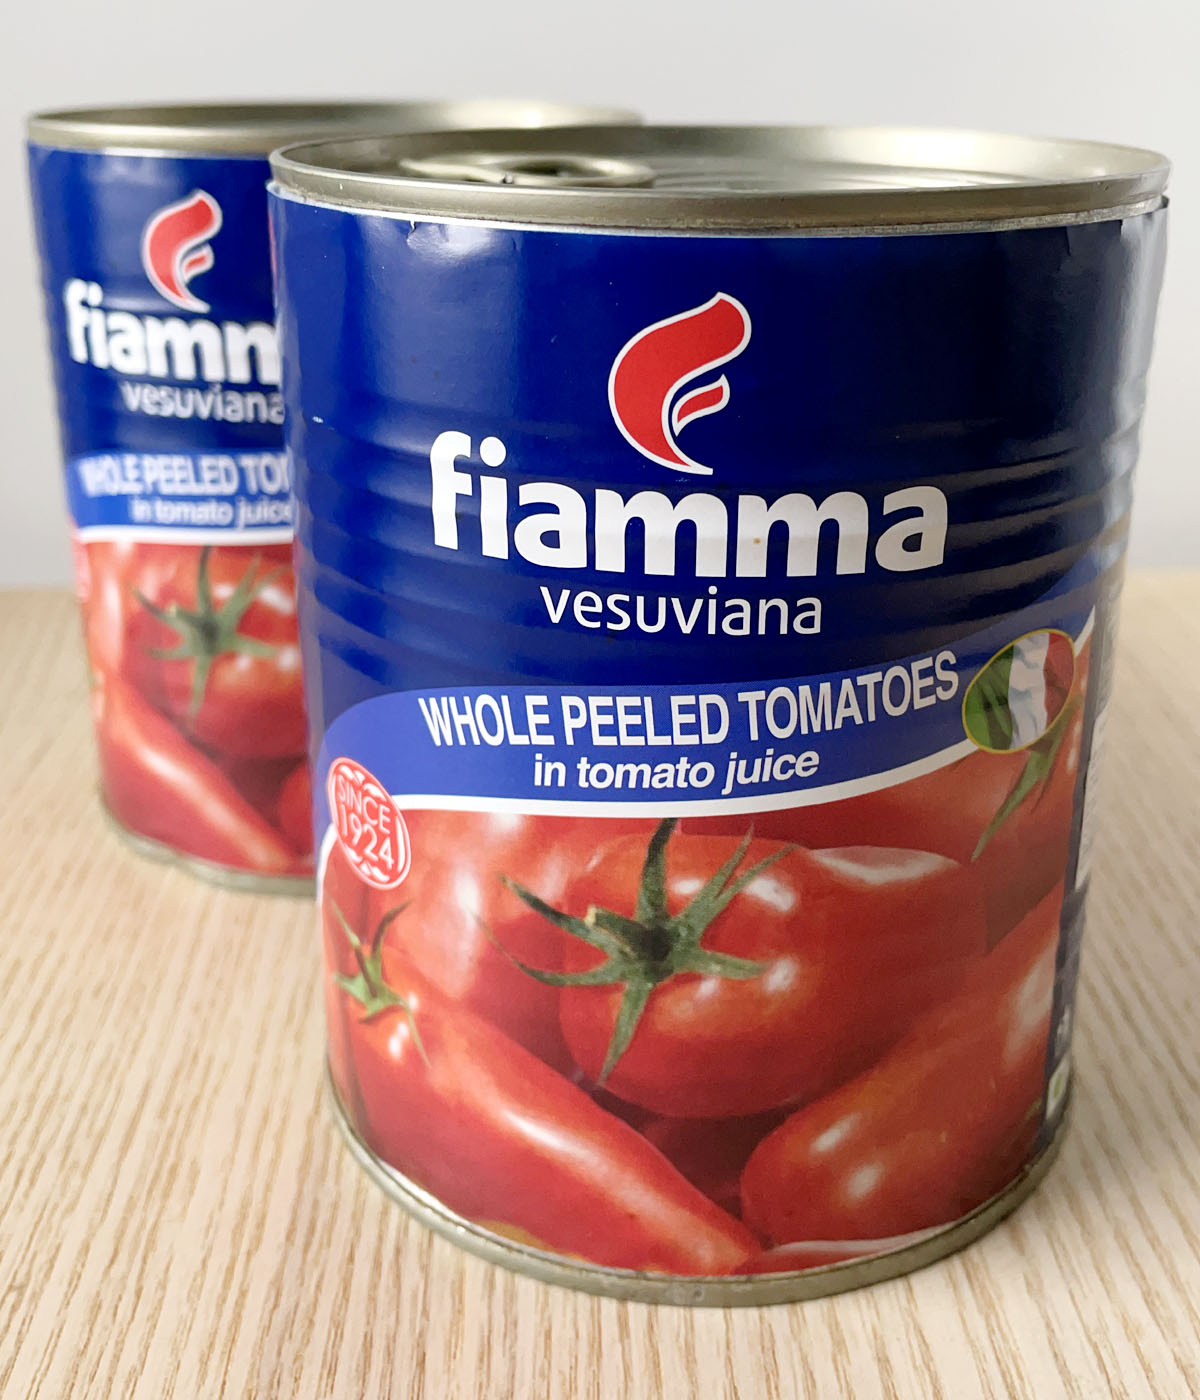 Two cans of whole peeled tomatoes.